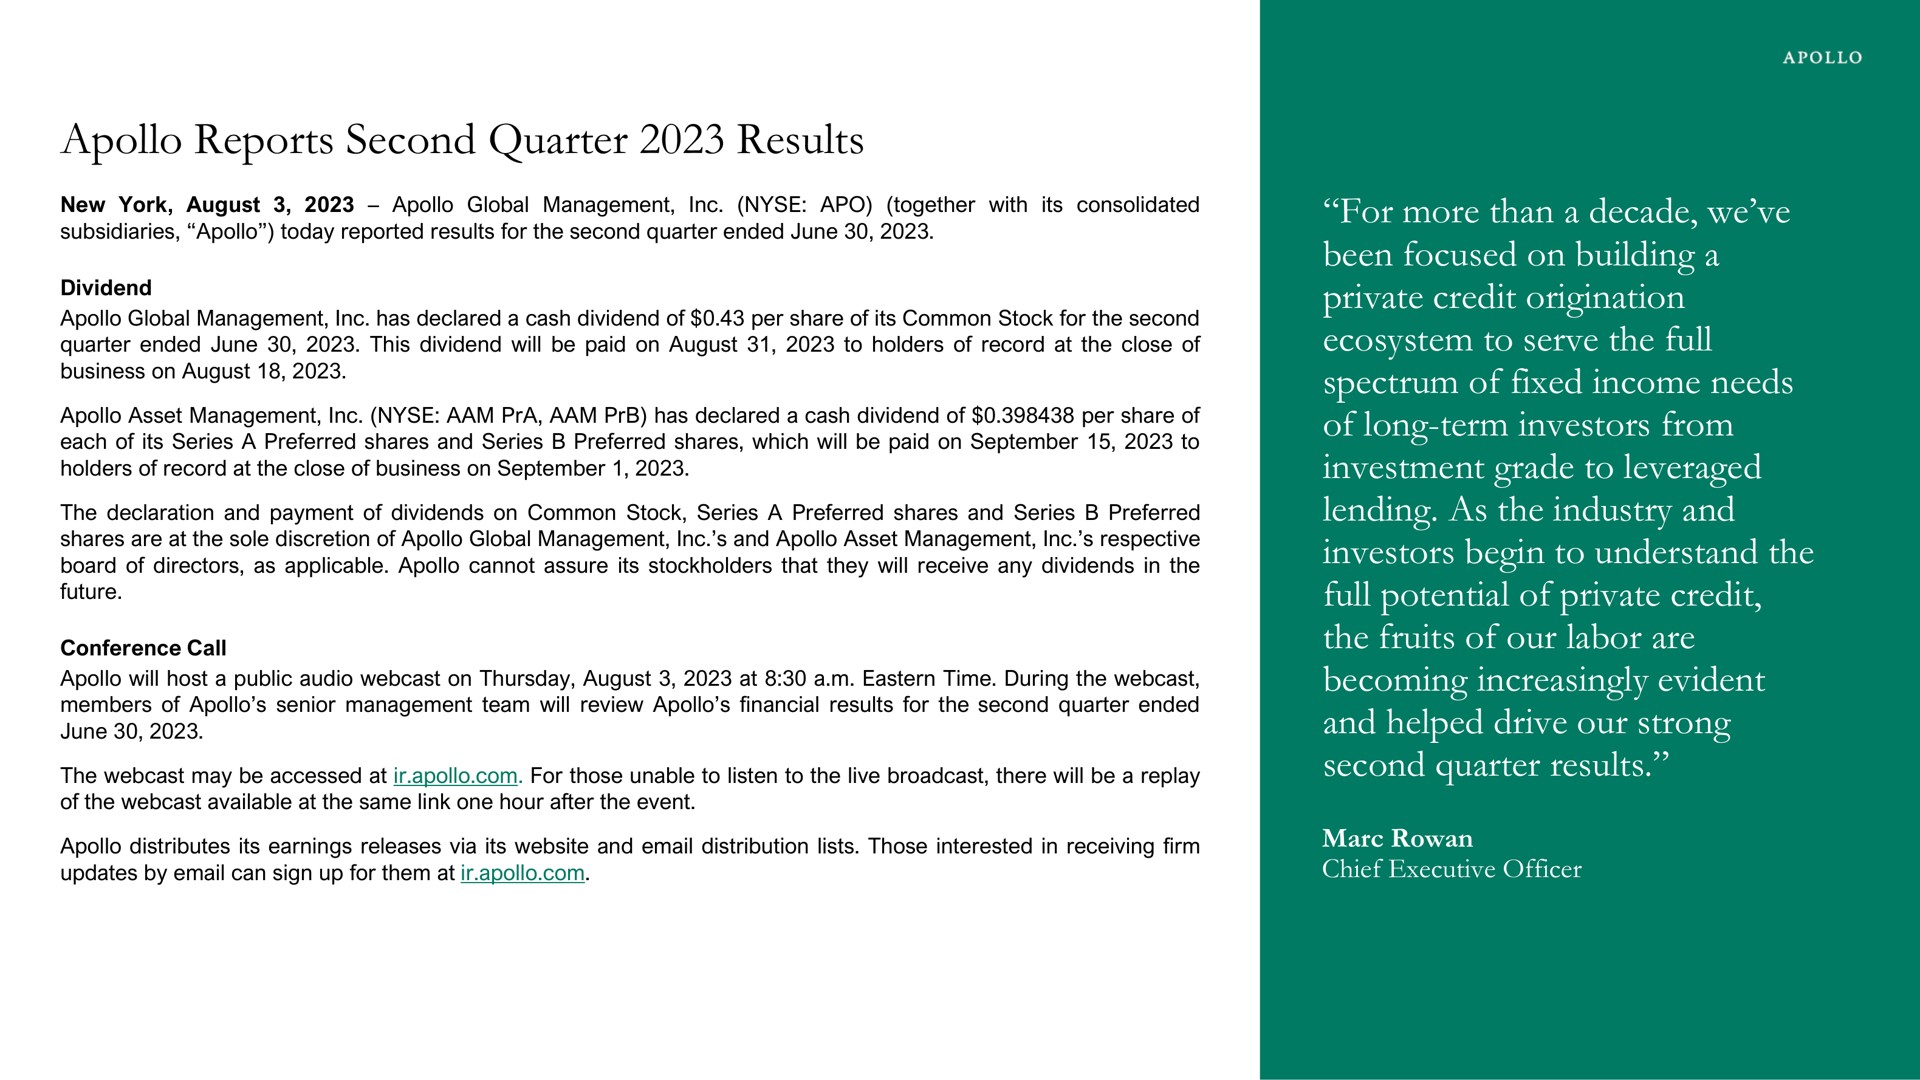 reports second quarter results for more than a decade we been focused on building a private credit origination ecosystem to serve the full spectrum of fixed income needs of long term investors from investment grade to leveraged lending as the industry and investors begin to understand the full potential of private credit the fruits of our labor are becoming increasingly evident and helped drive our strong second quarter results ako | Apollo Global Management